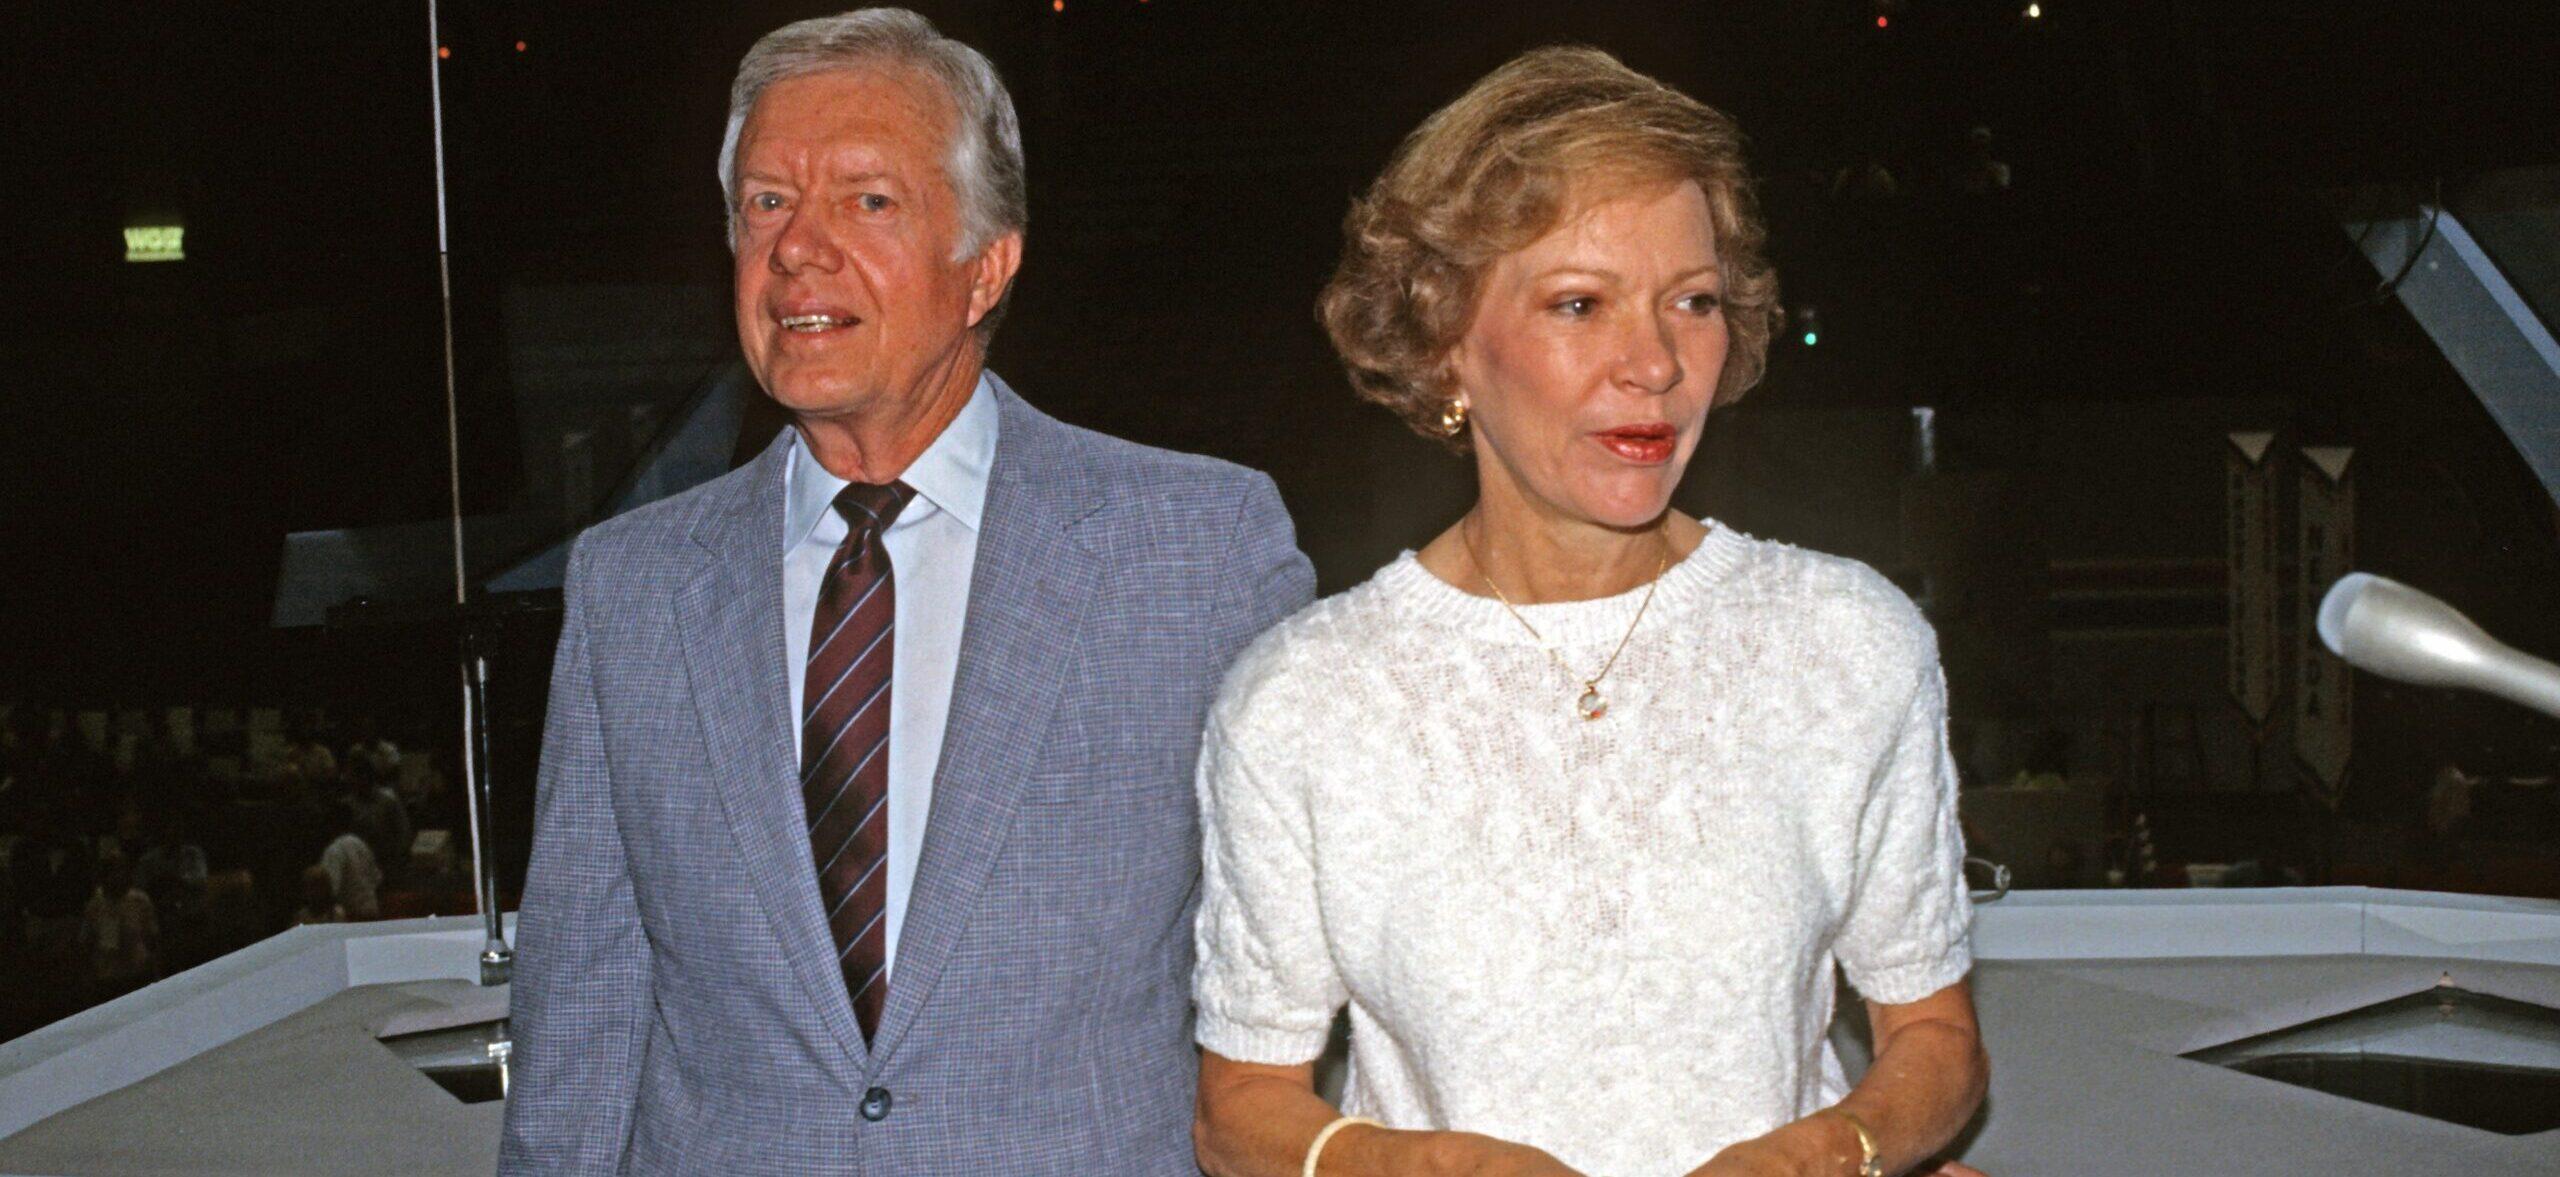 Former President Jimmy Carter’s Wife Rosalynn Joins Him In Hospice Care Amid Dementia Battle